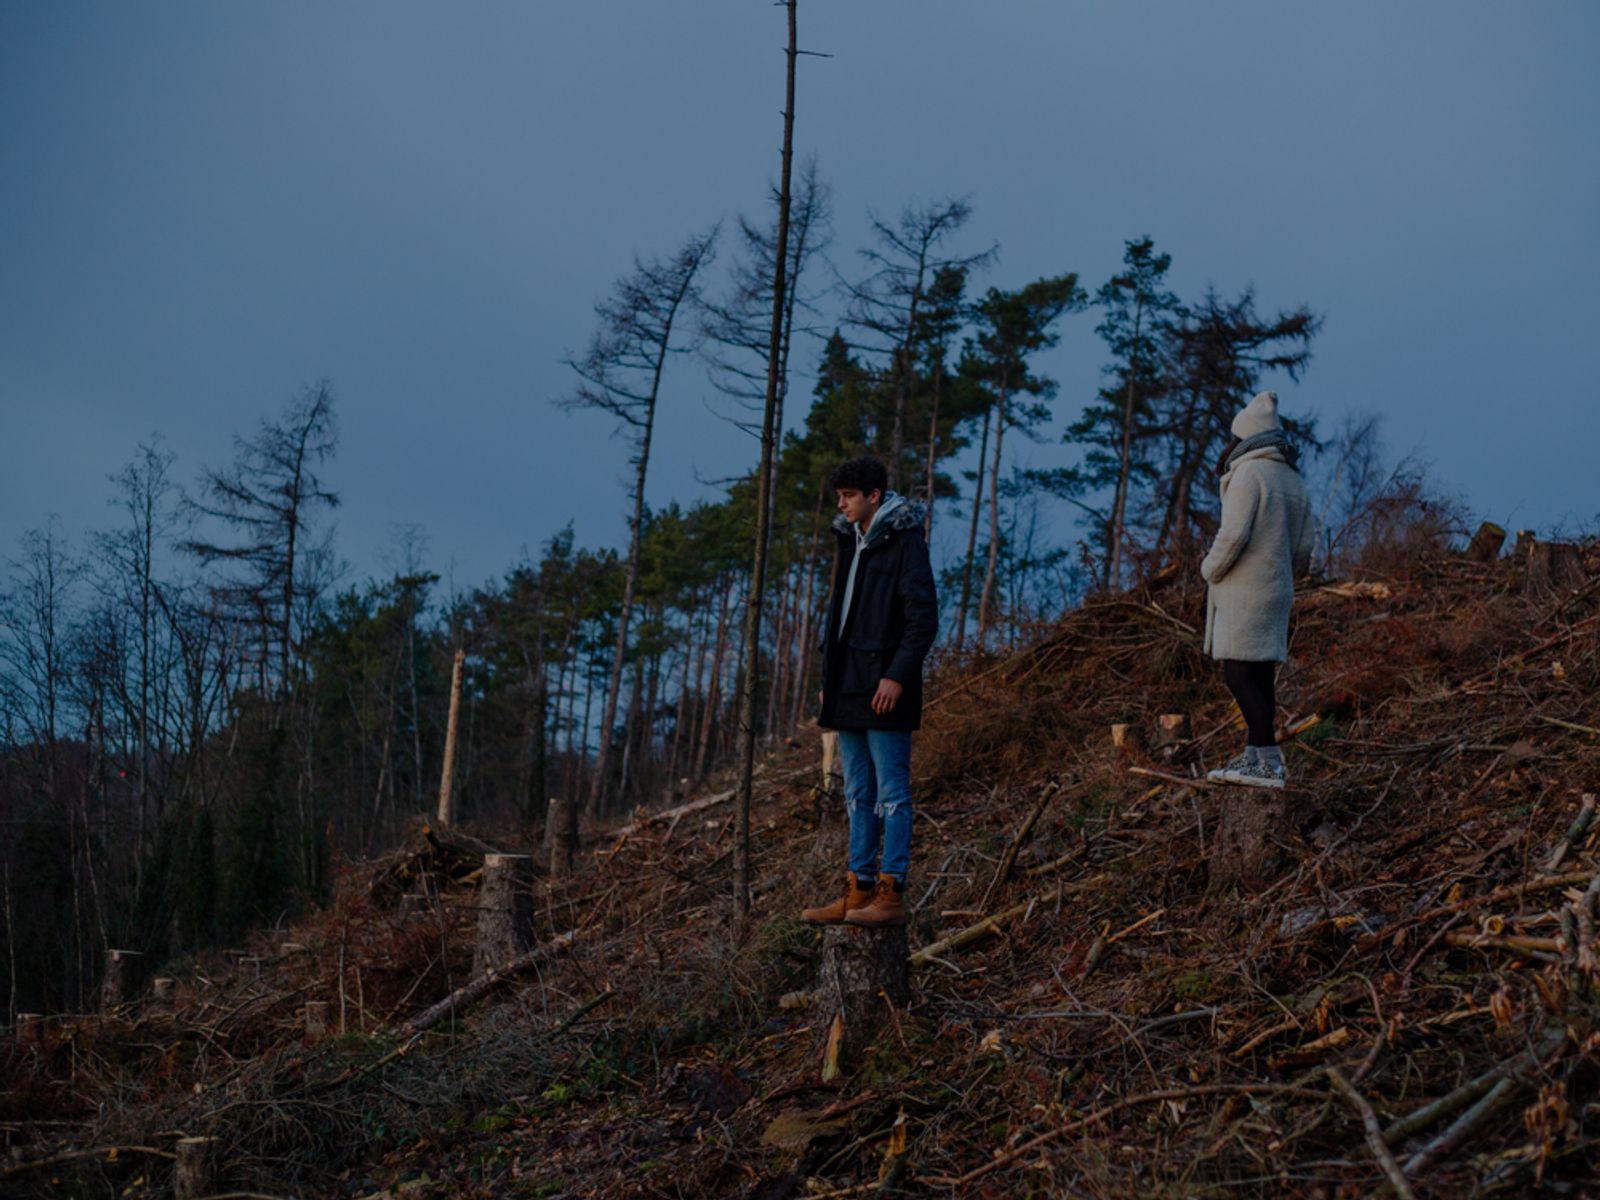 © Lea Franke - "Ronja and Lars in the Deputy Forest"